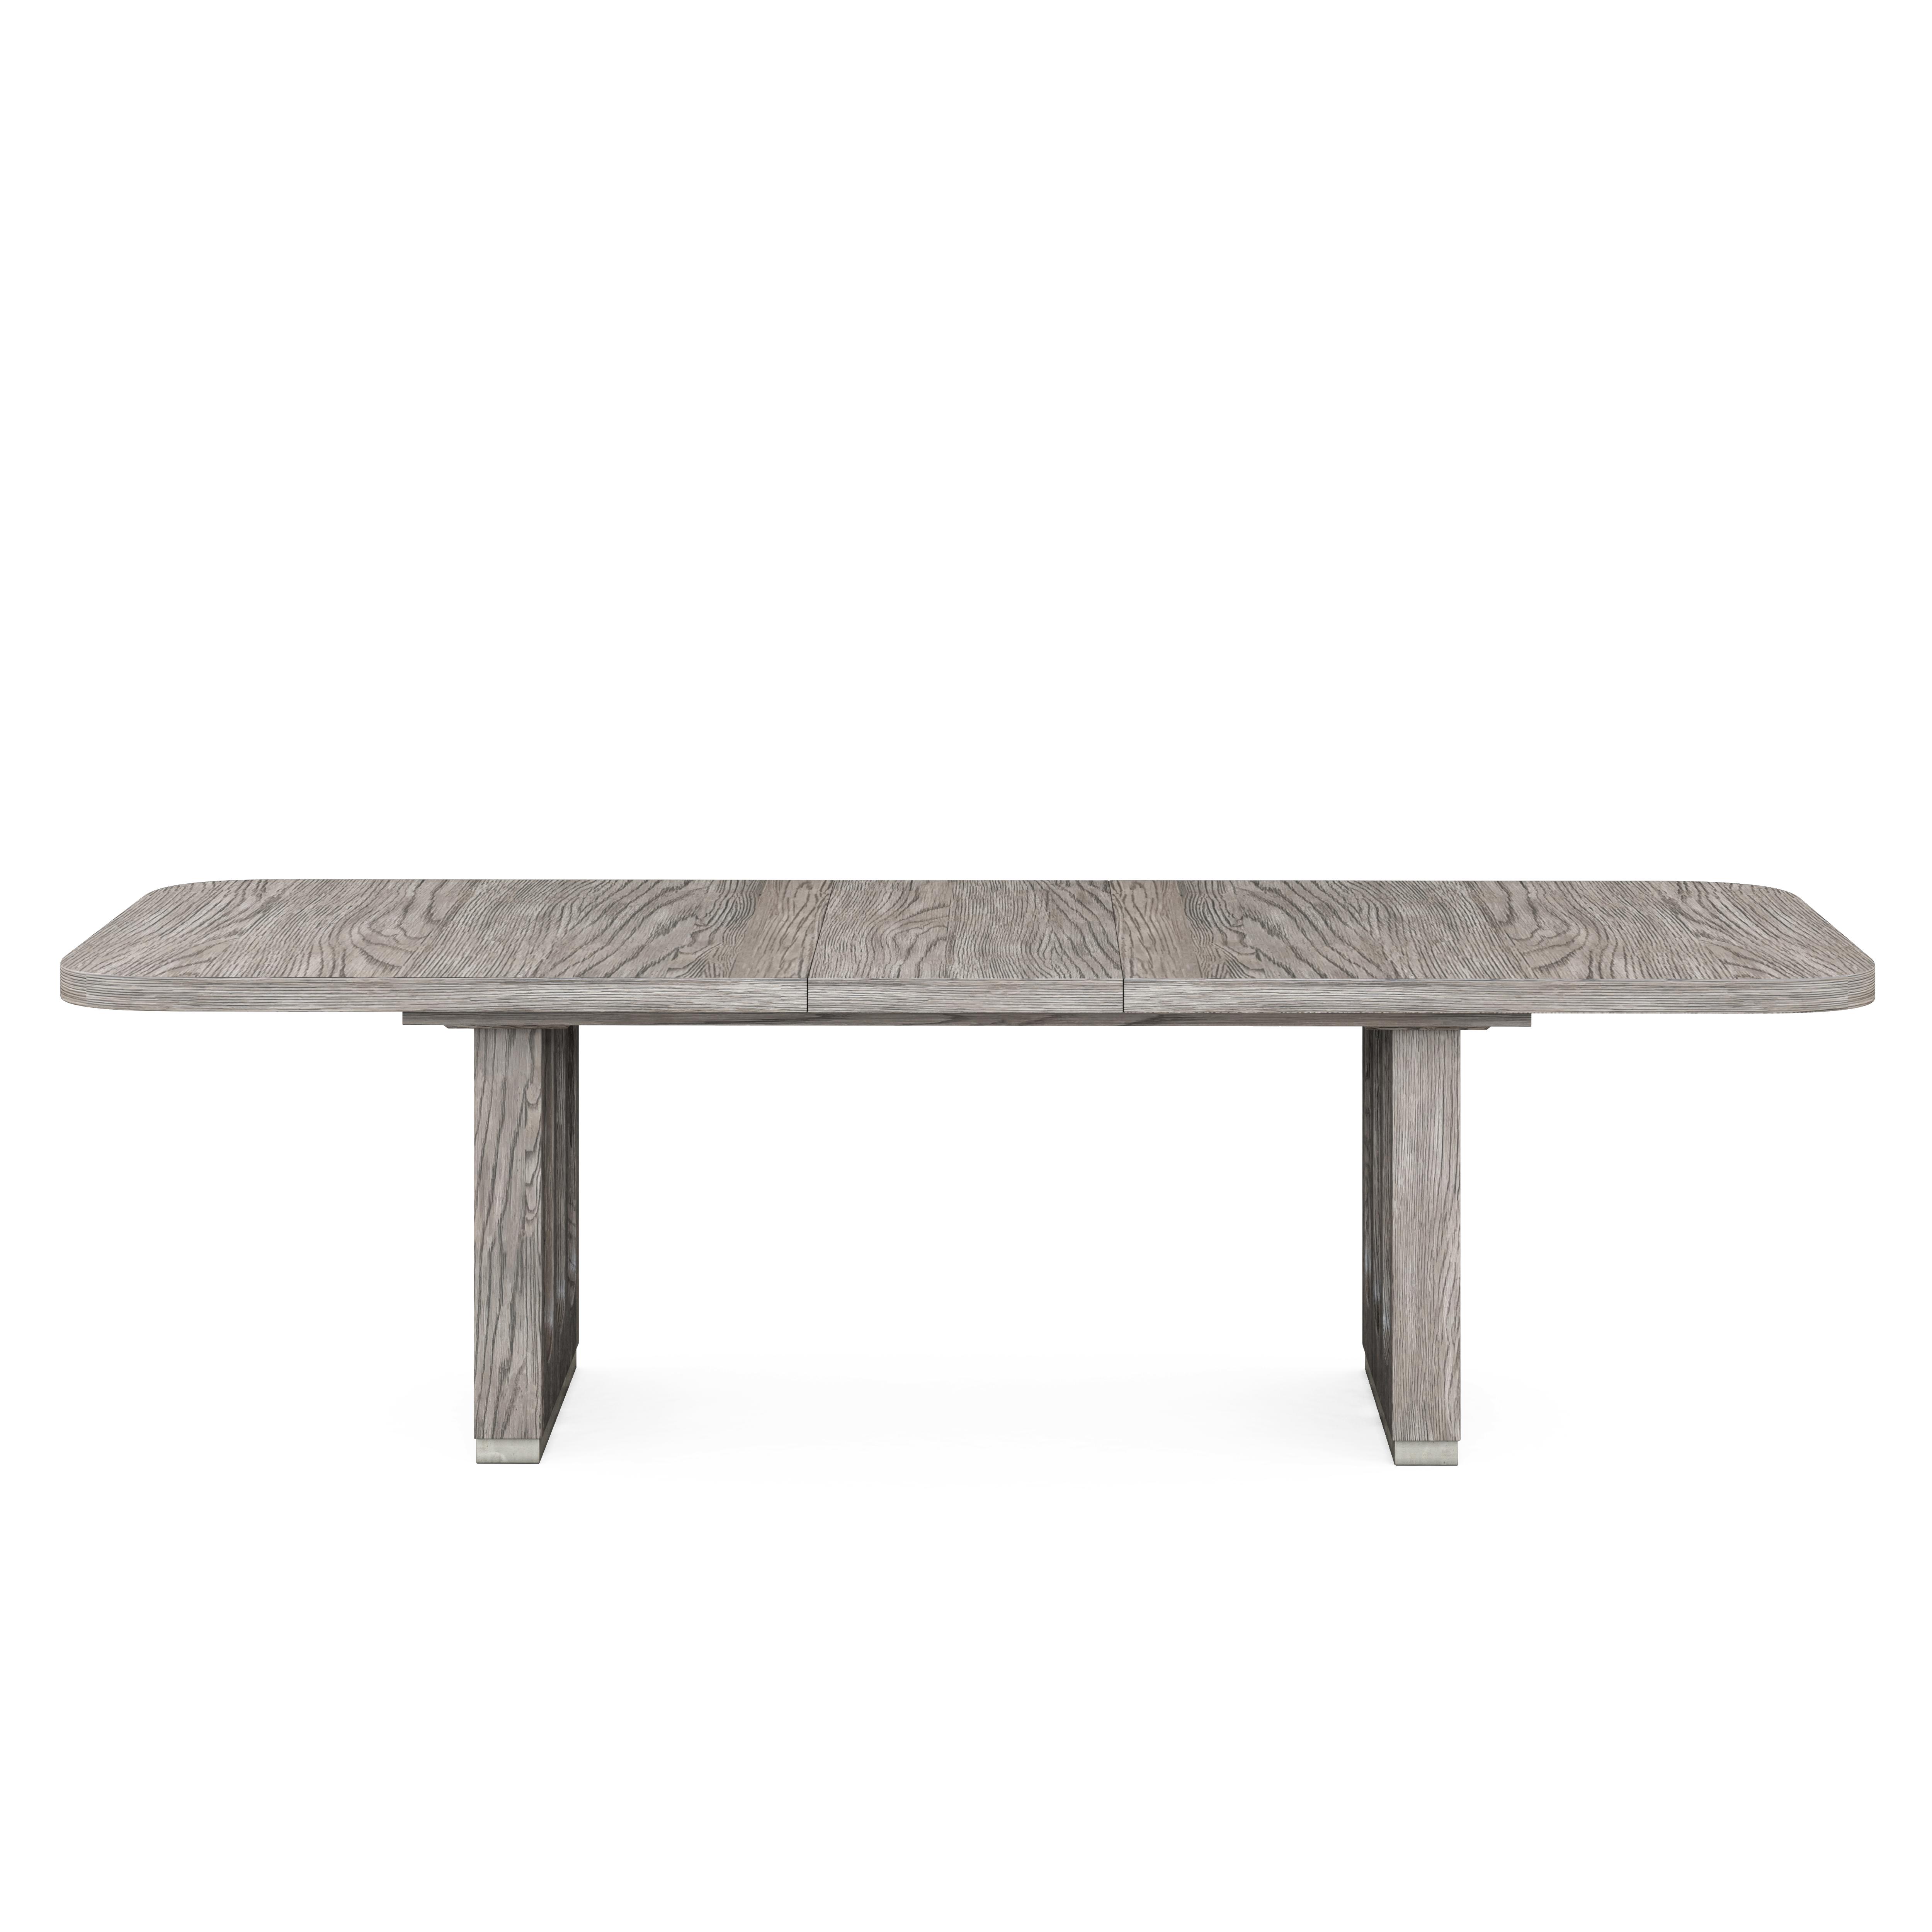 Modern, Casual Dining Table Vault 285221-2354 in Gray 